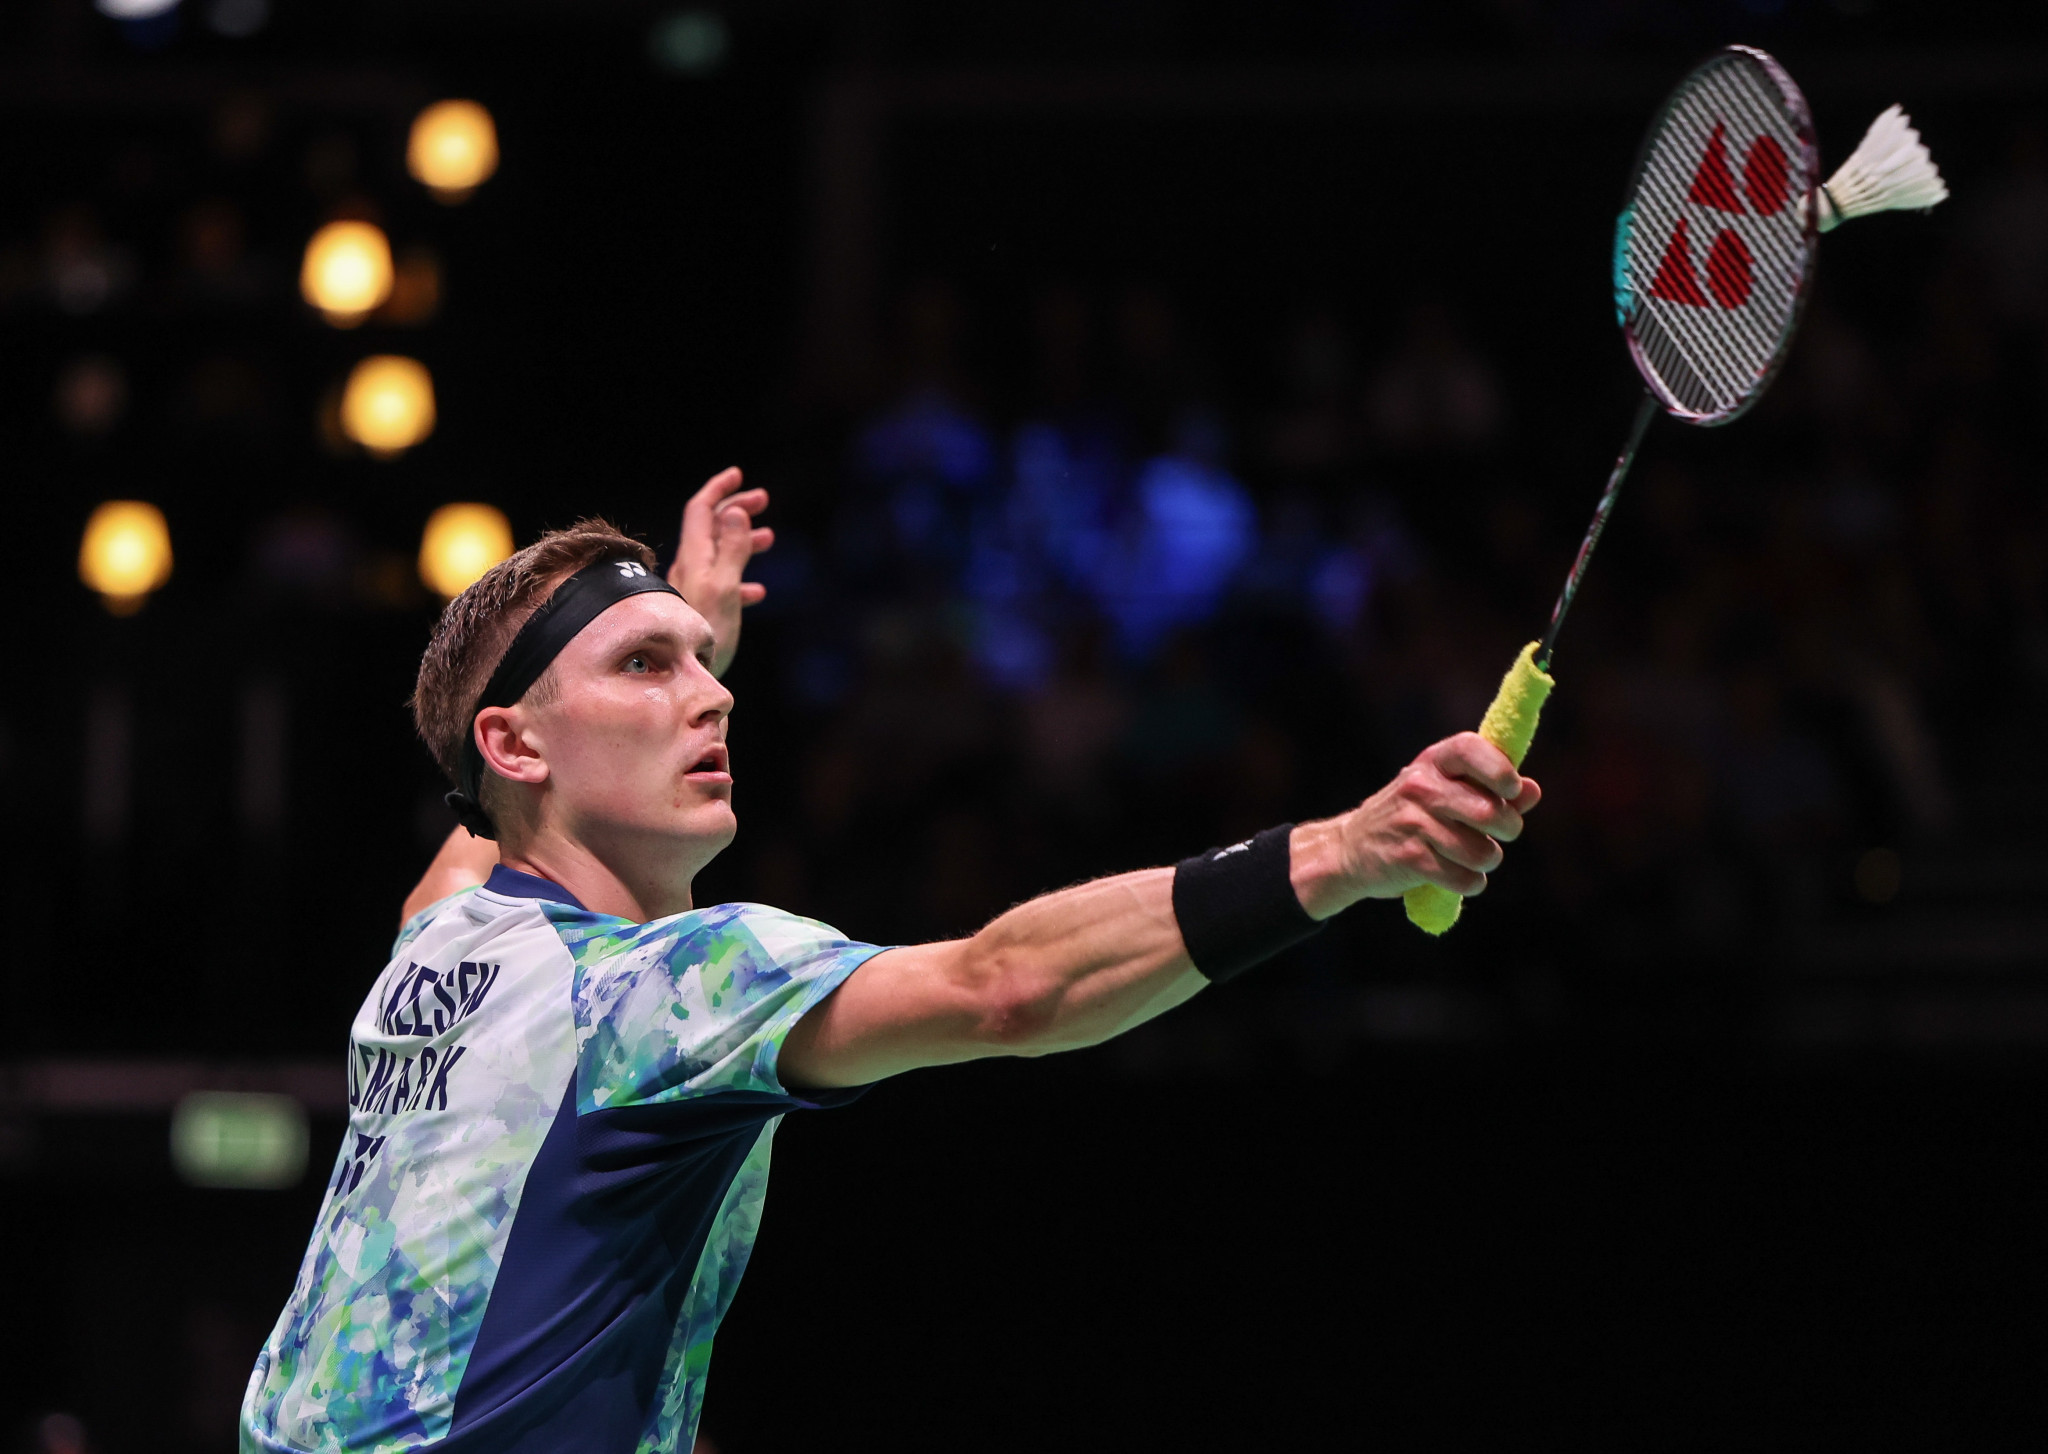 Reigning Olympic and world champion Viktor Axelsen of Denmark sealed his place in the quarter-final where he will face HS Prannoy of India ©Badmintonphoto